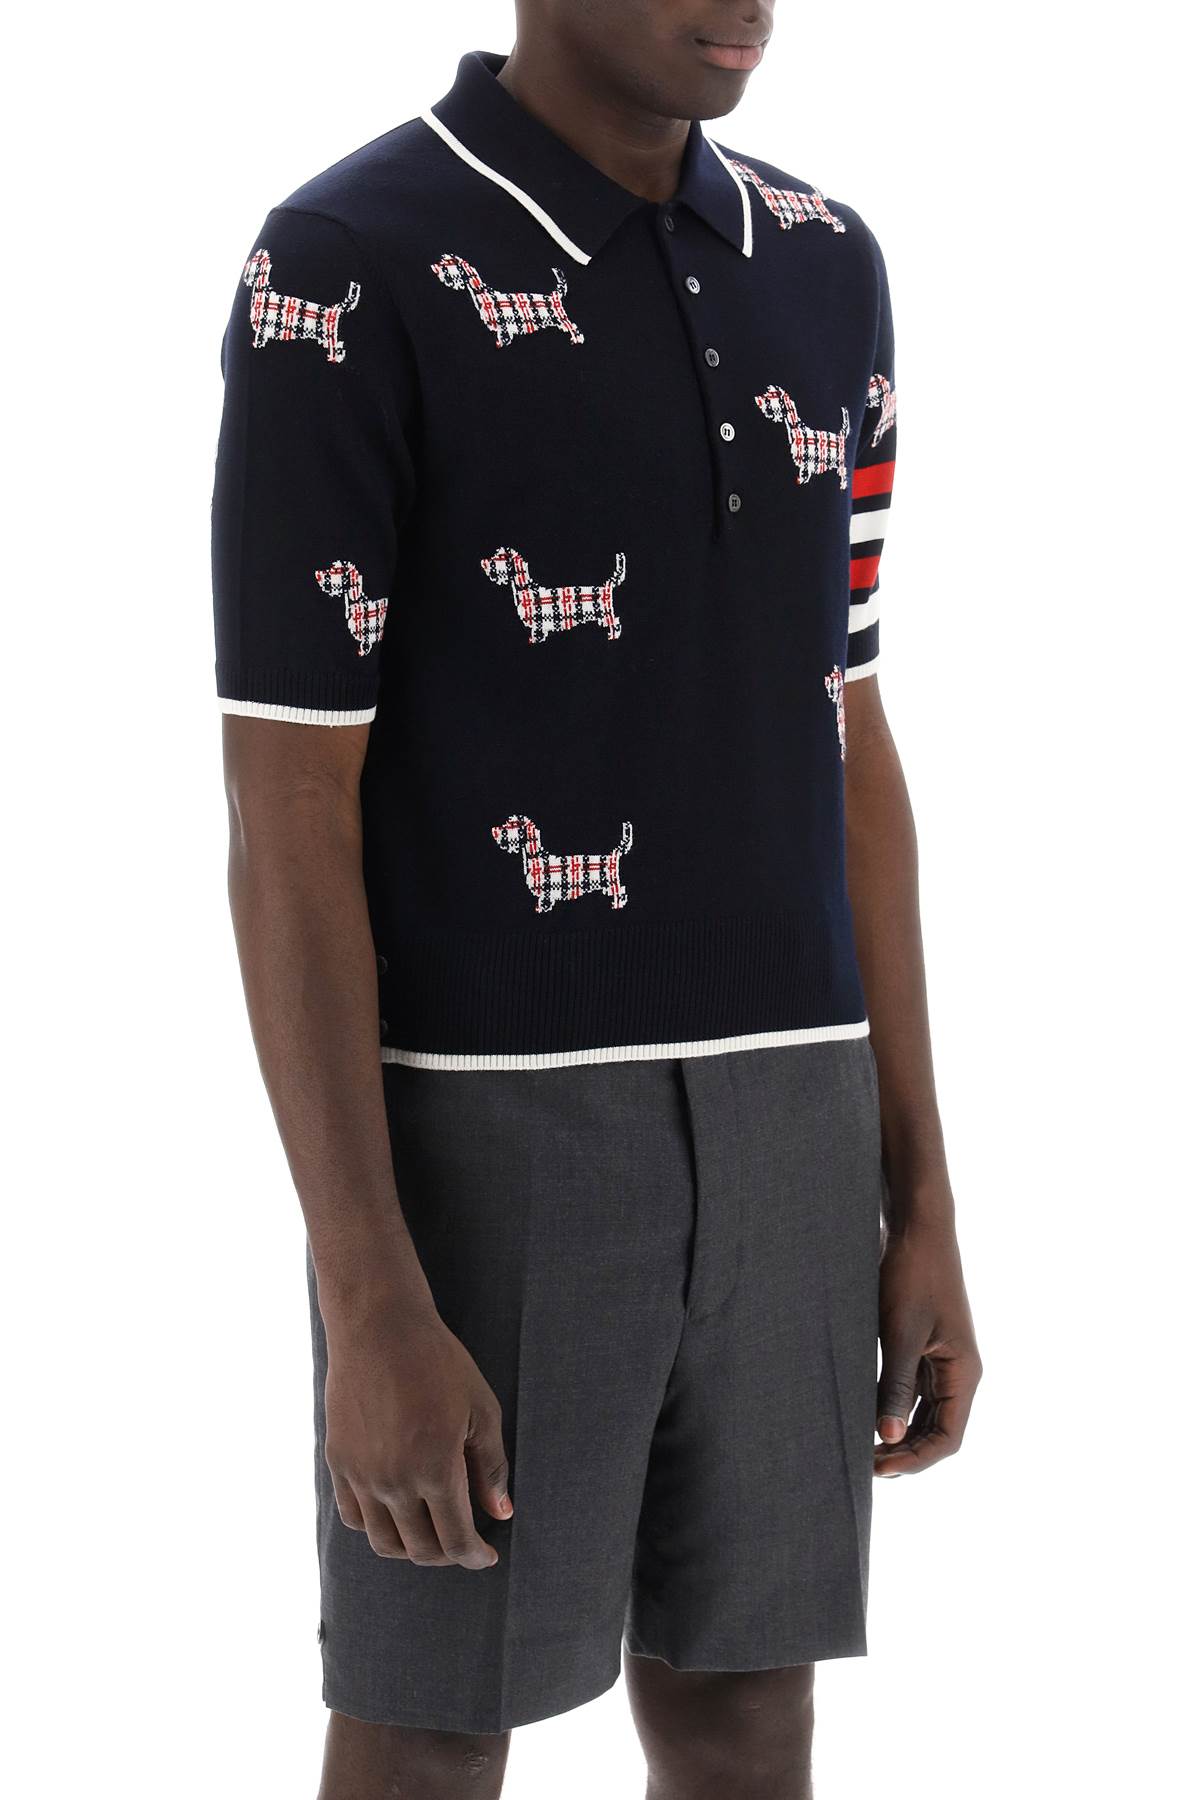 Thom browne hector knitted polo shirt-1